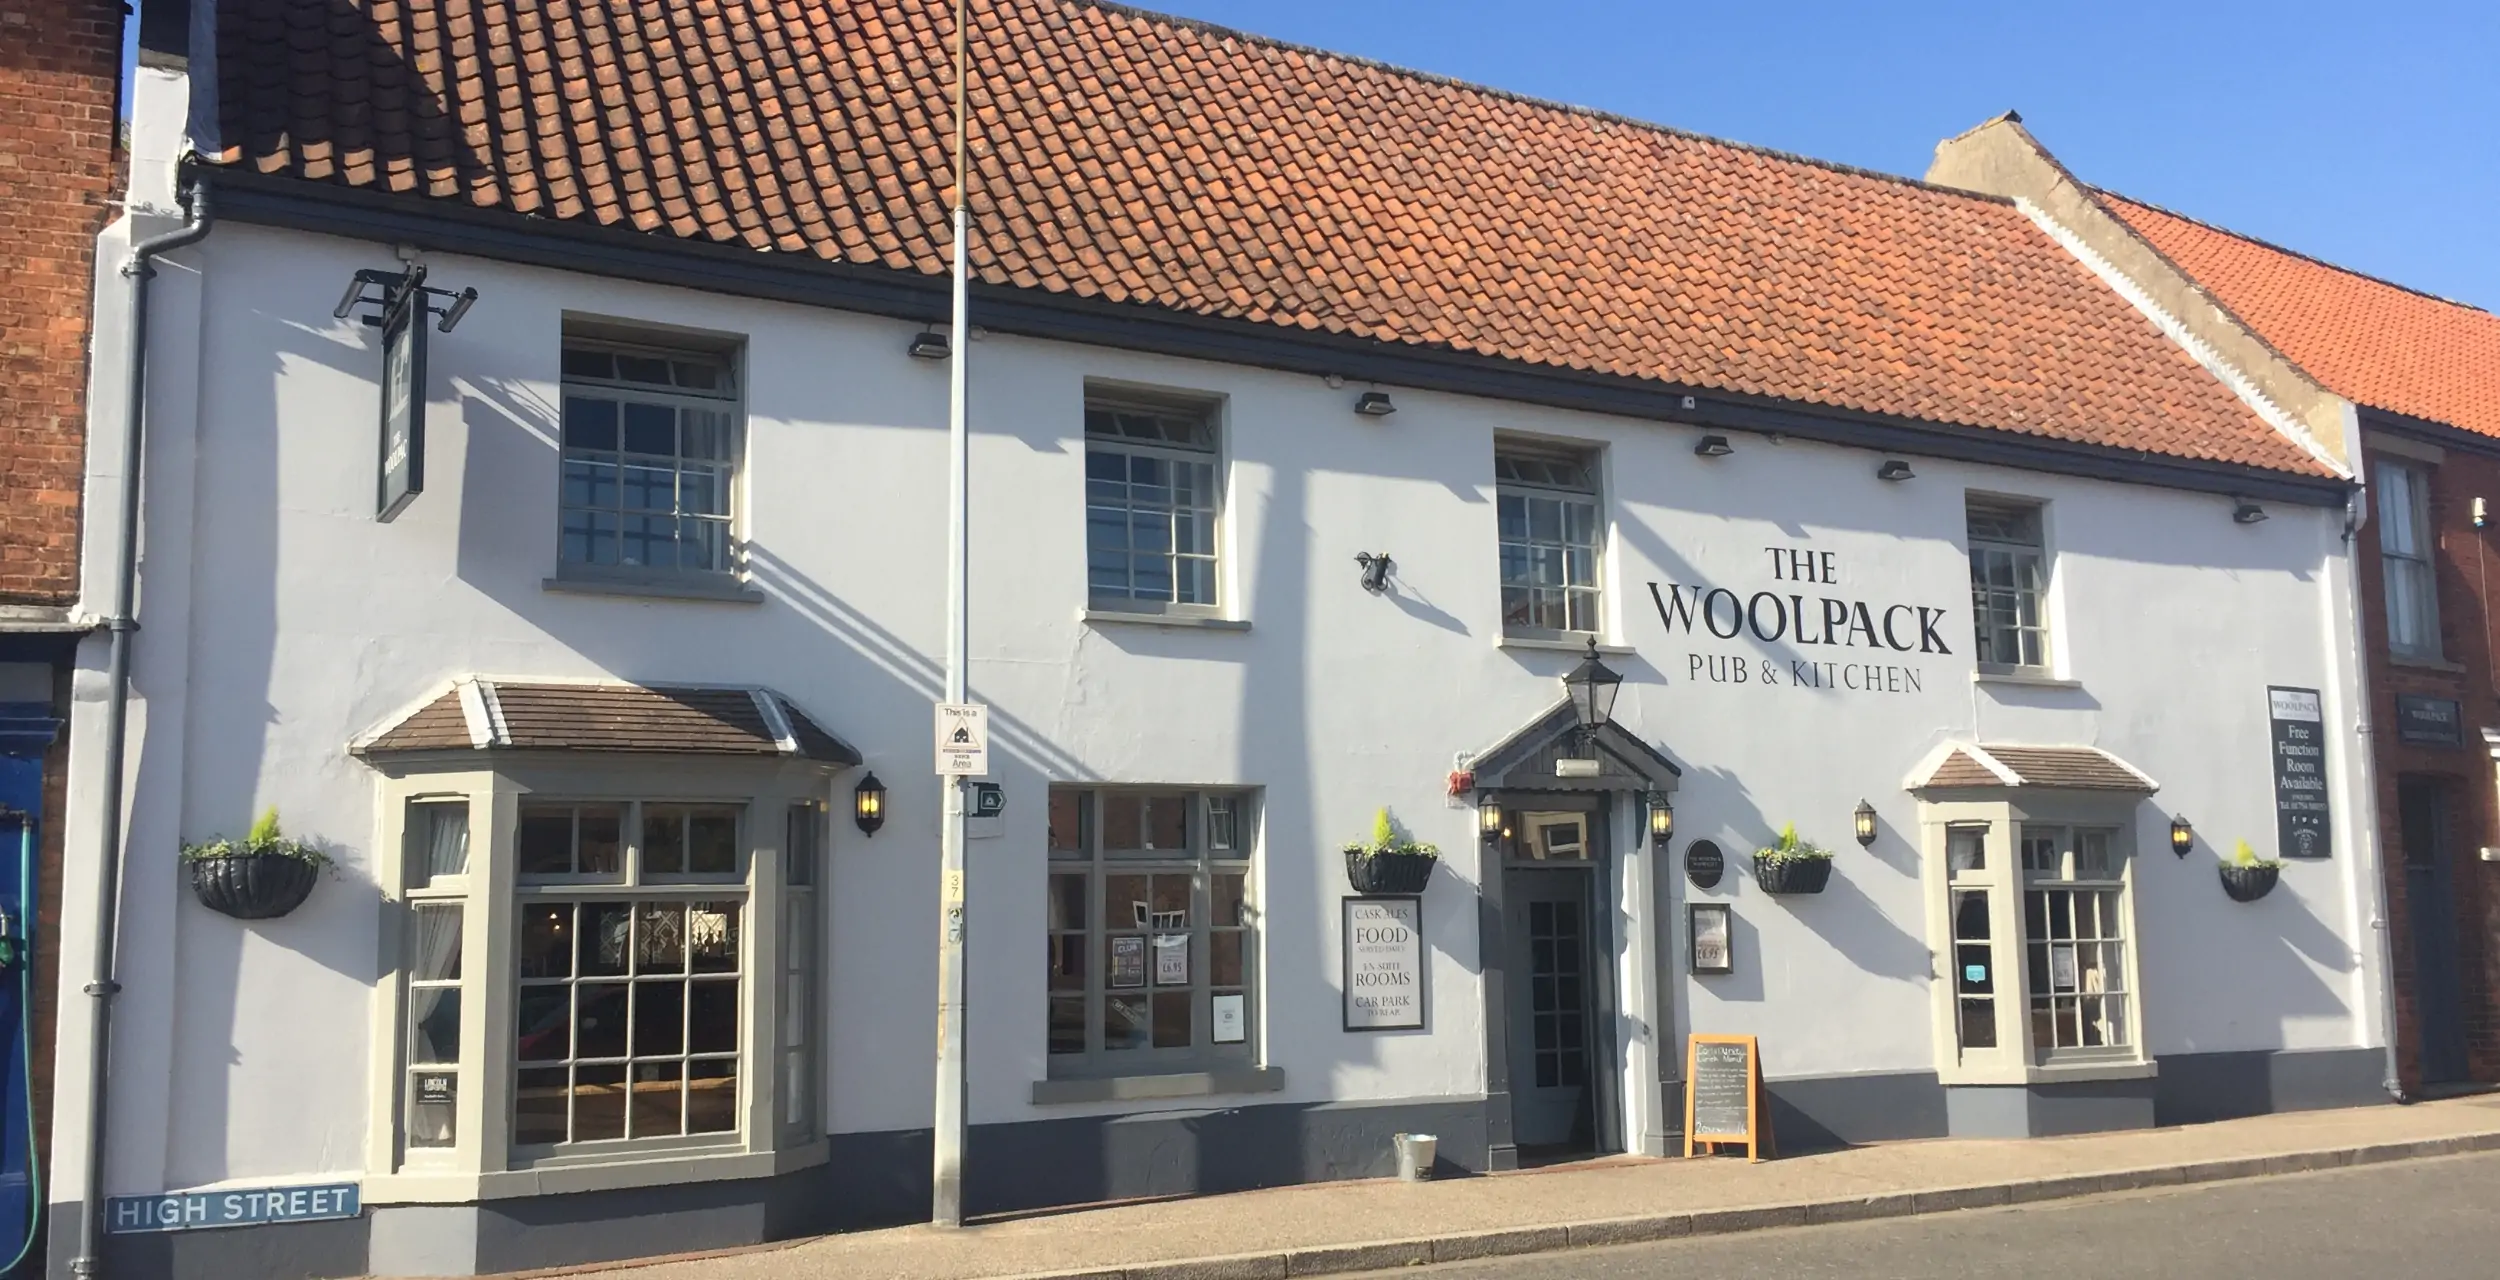 The front exterior of the Woolpack Pub & Kitchen